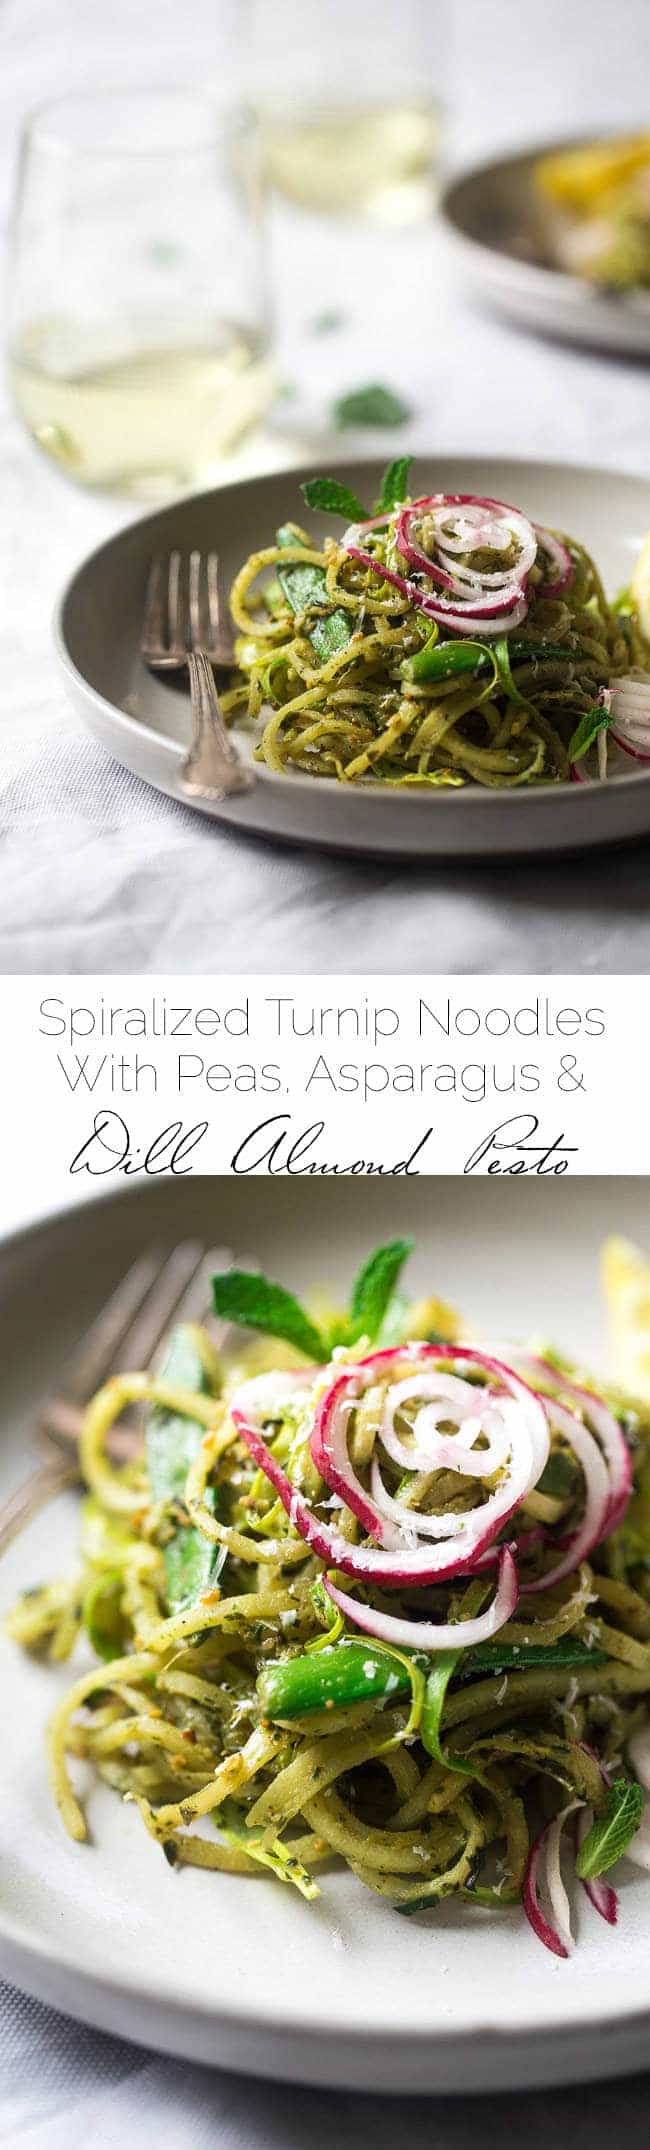 Turnip Noodle Pesto Pasta Salad with Peas and Asparagus – Spiralized turnips, asparagus and peas are tossed with pesto for a light, healthy and easy Spring meal! Low carb, gluten free and Vegetarian! | Foodfaithfitness.com | @FoodFaithFit